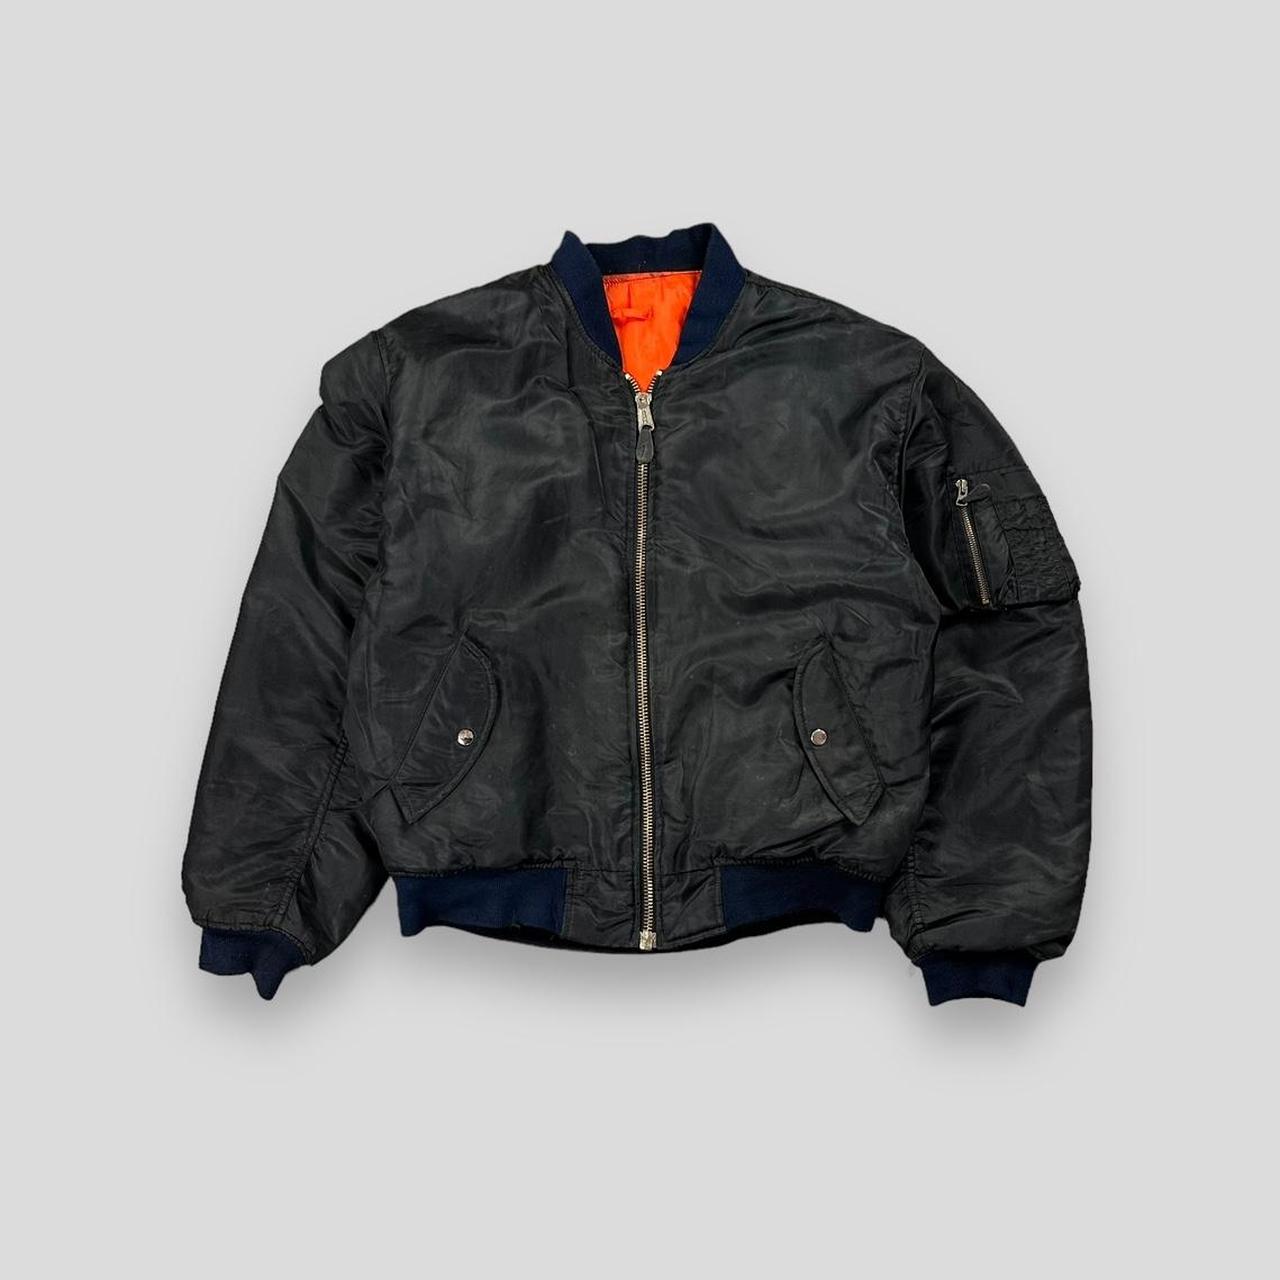 Vintage 90s Alpha Industries MA-1 Reversible Bomber